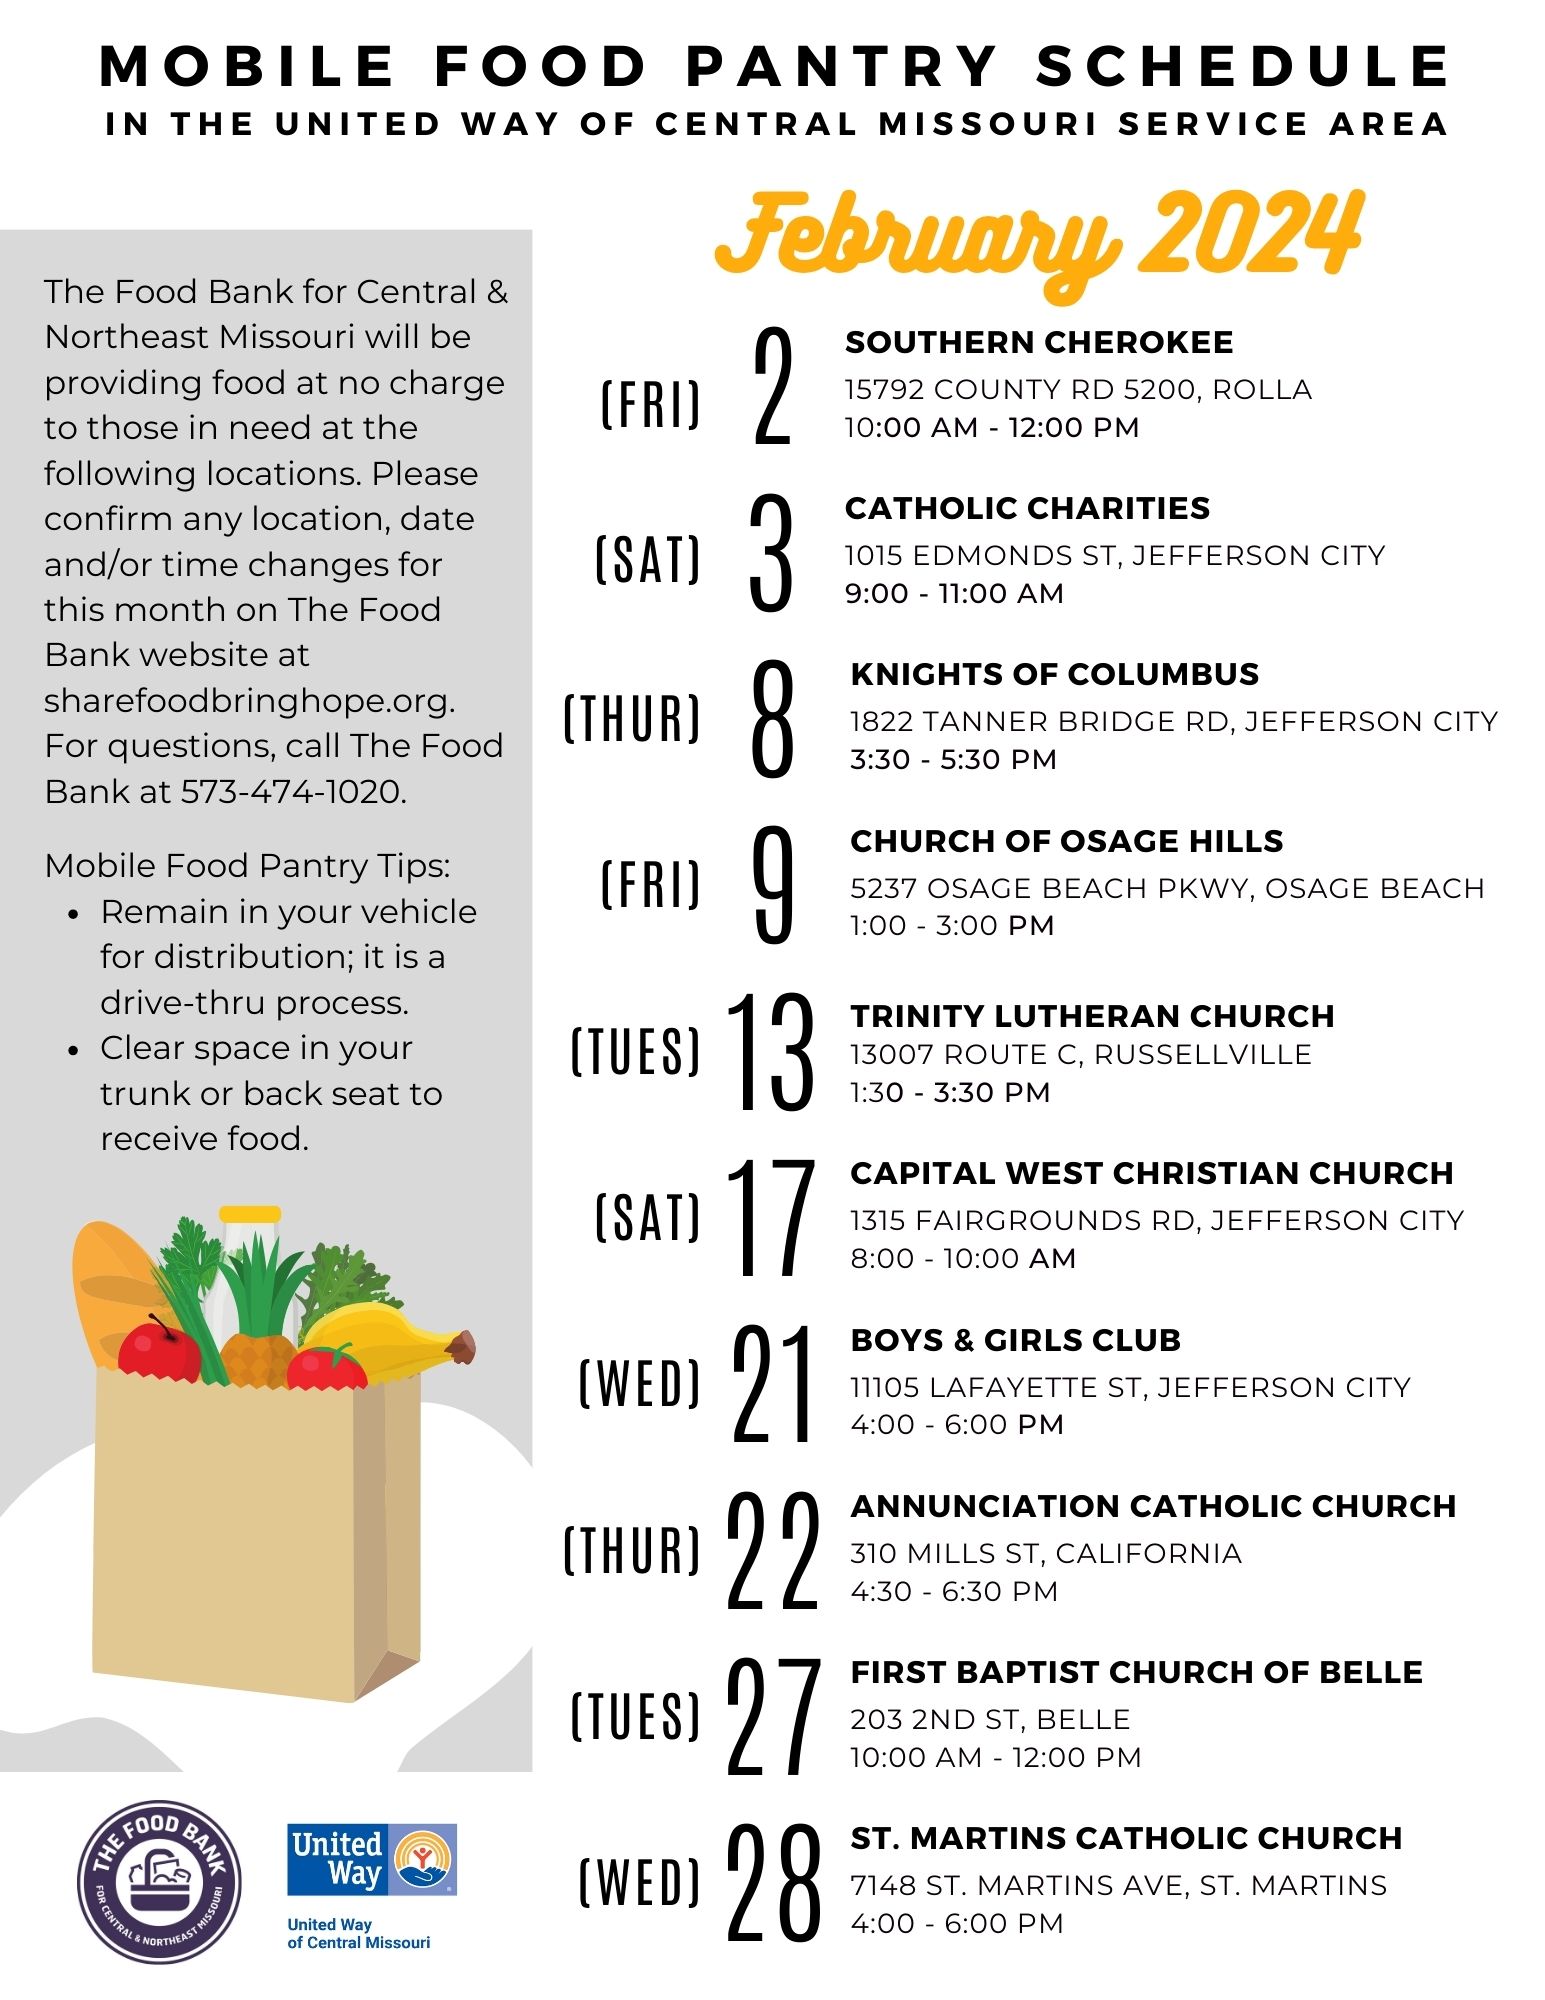 February Mobile Food Pantry